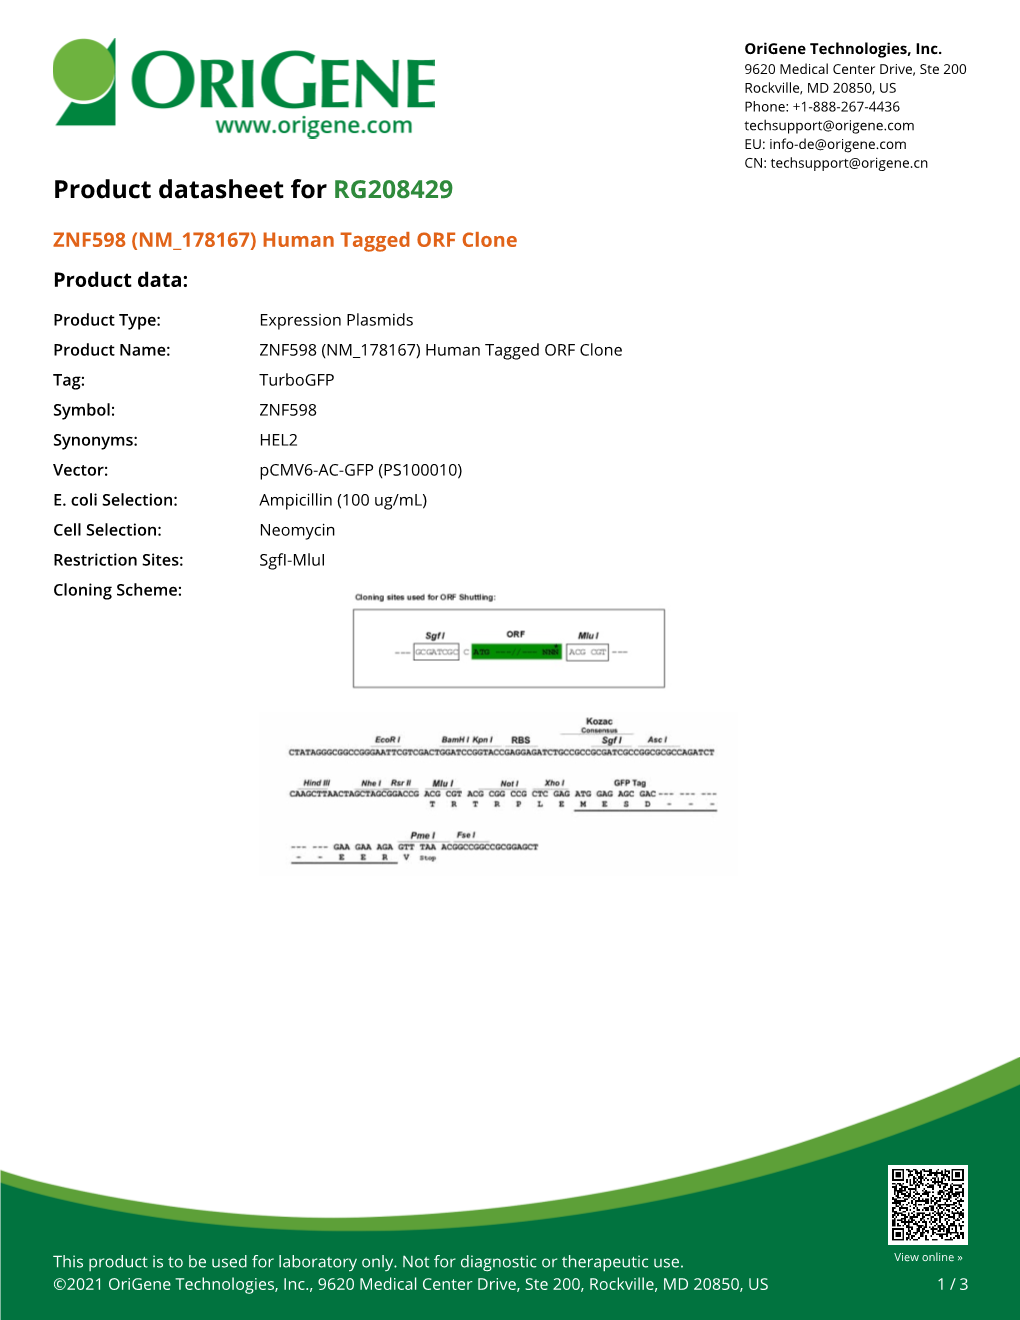 ZNF598 (NM 178167) Human Tagged ORF Clone Product Data